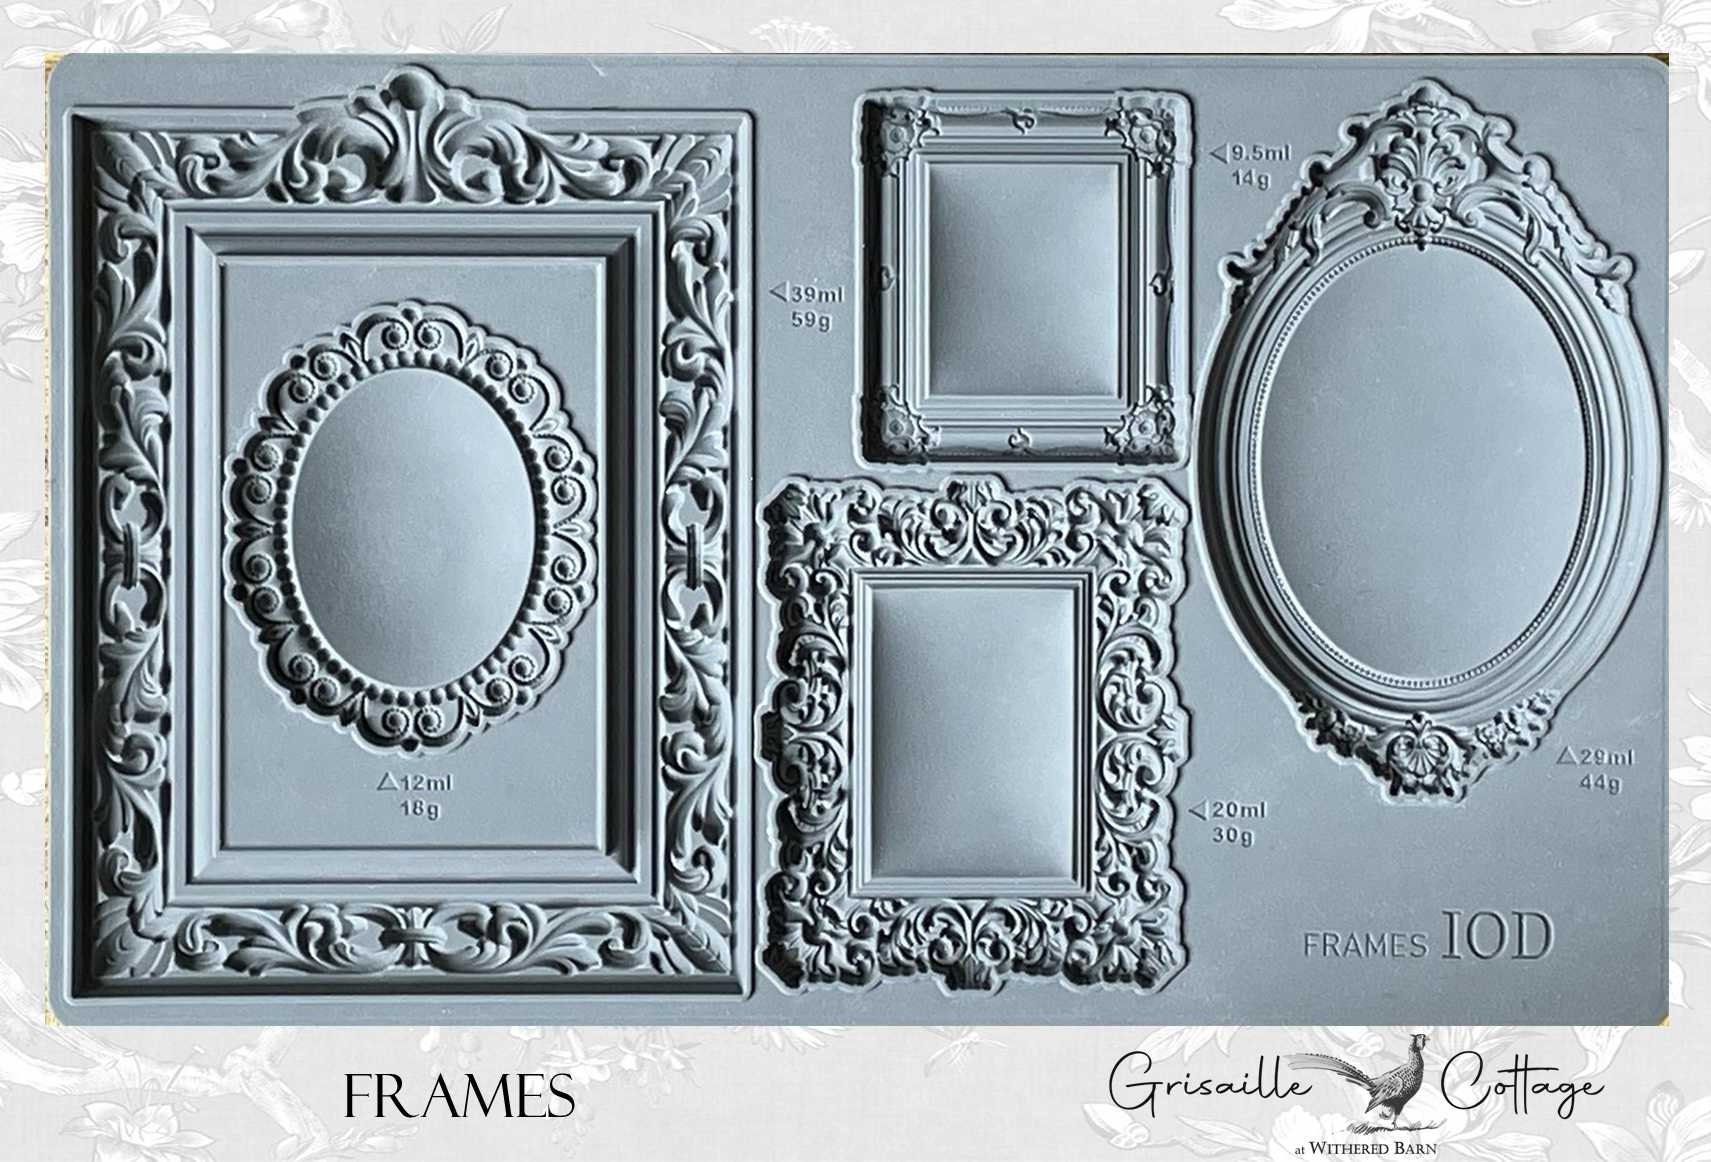 Dainty Flourishes IOD Décor Mould 6 X 10 by Iron Orchid Designs New Release  